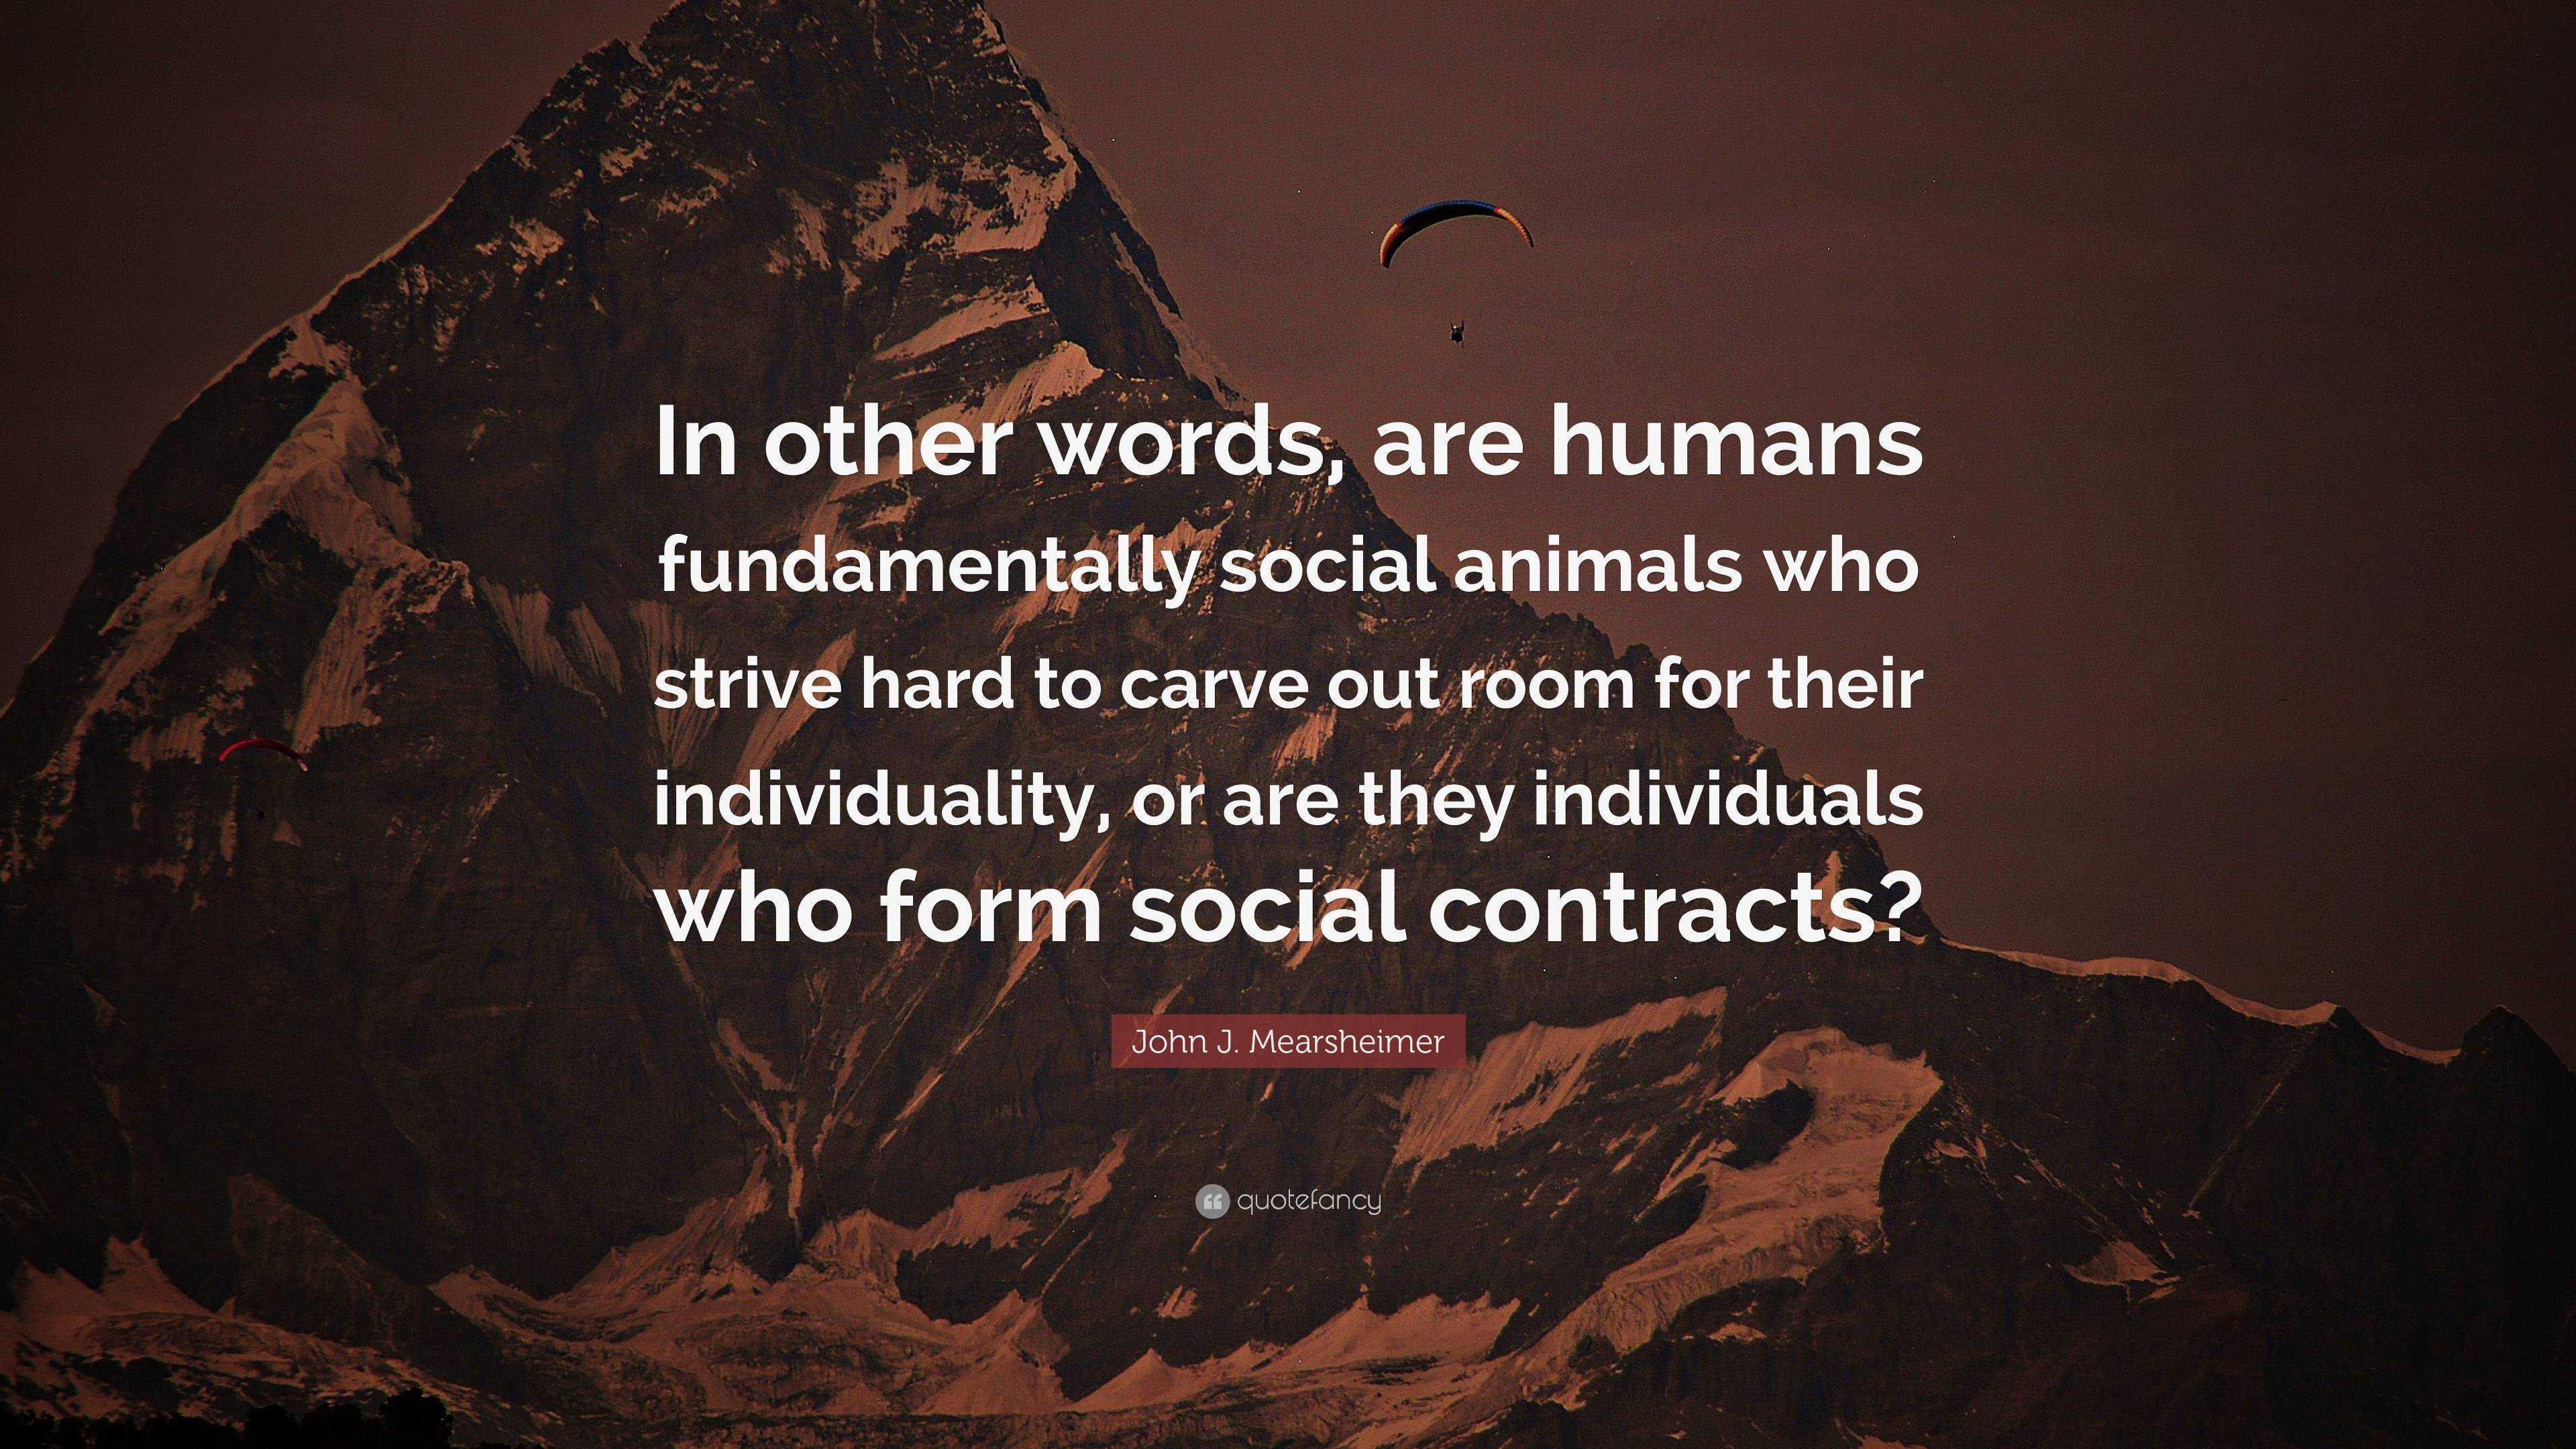 John J. Mearsheimer Quote: “In other words, are humans fundamentally social  animals who strive hard to carve out room for their individuality, or ar...”